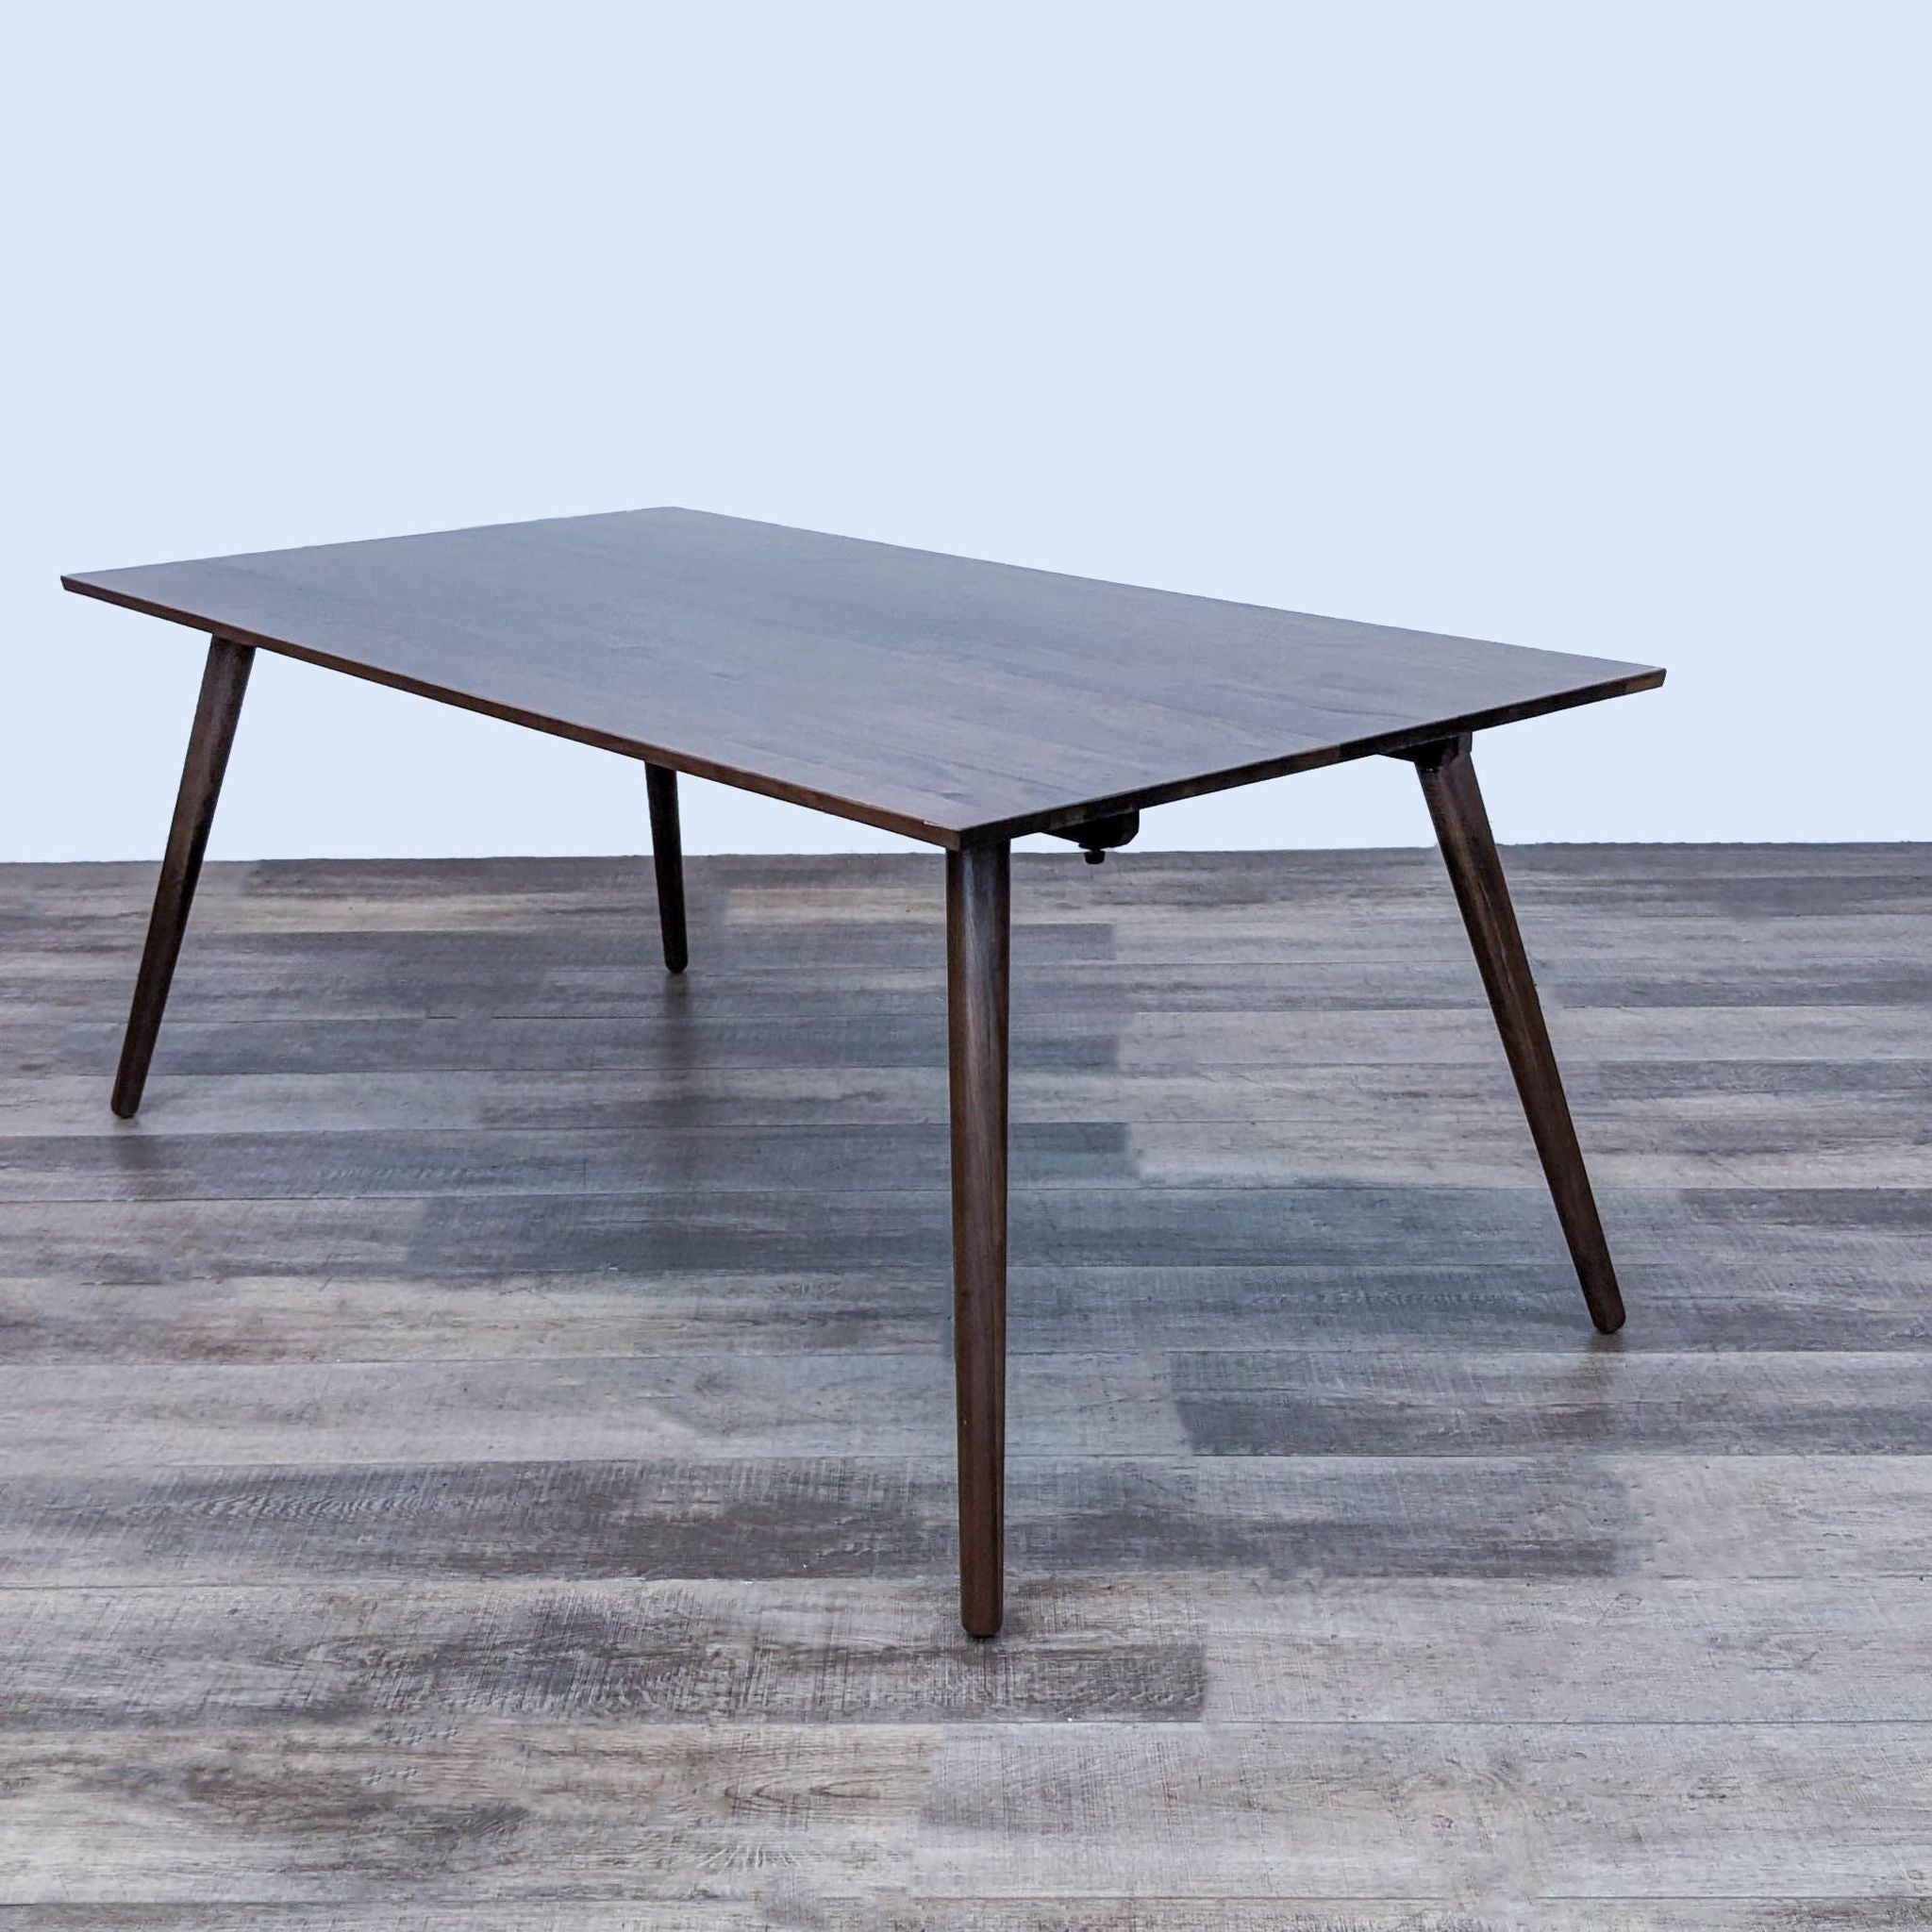 Article Seno Dining Table with mid-century modern design, tapered wooden legs, and clean lines, on a wood floor.